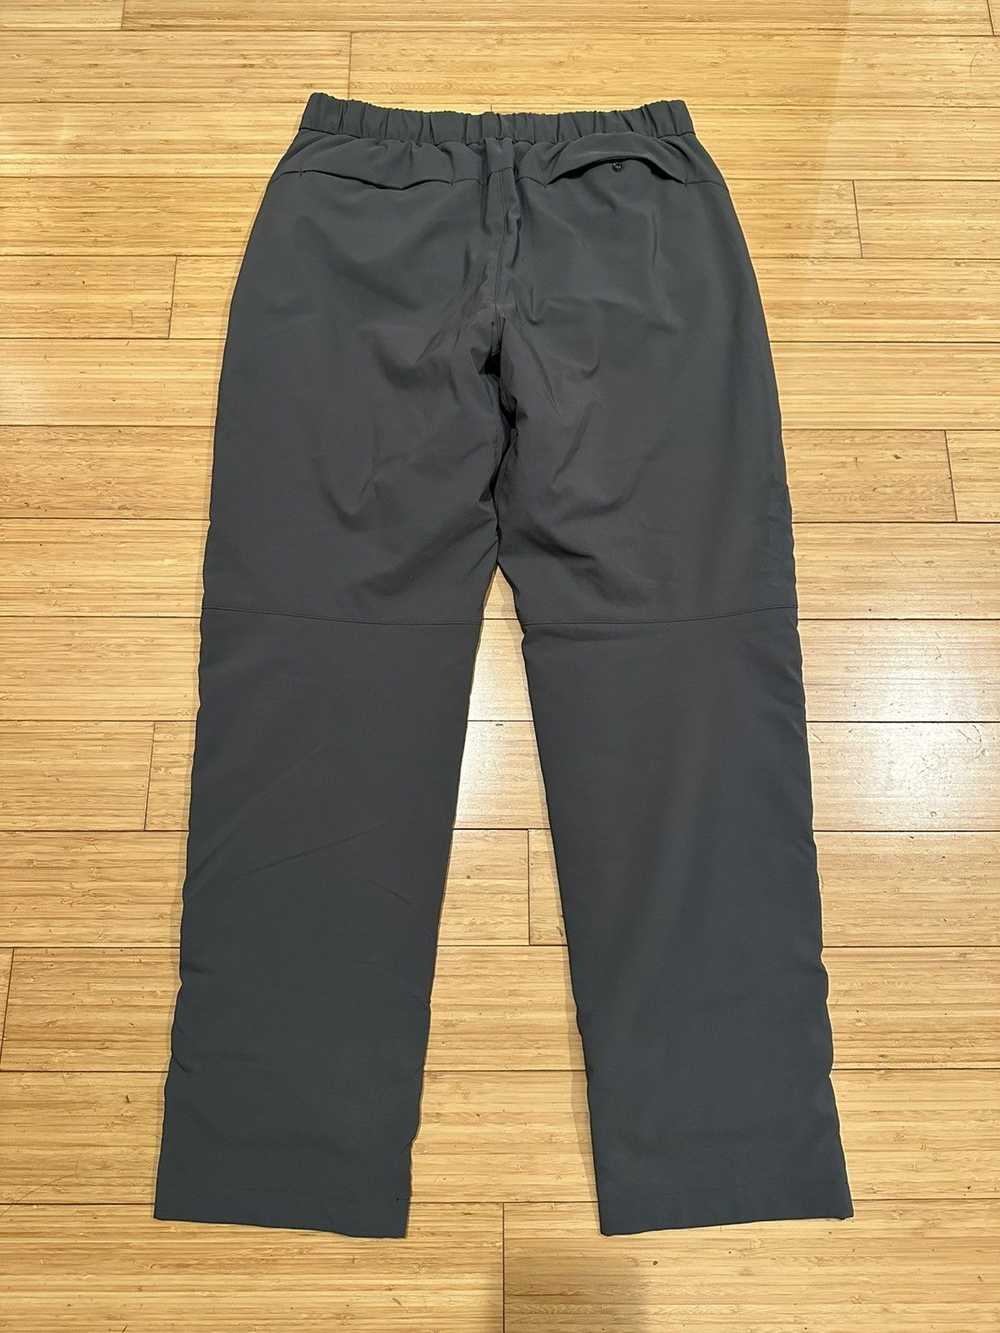 Uniqlo Uniqlo Windproof Extra Warm Lined Pants Gr… - image 8